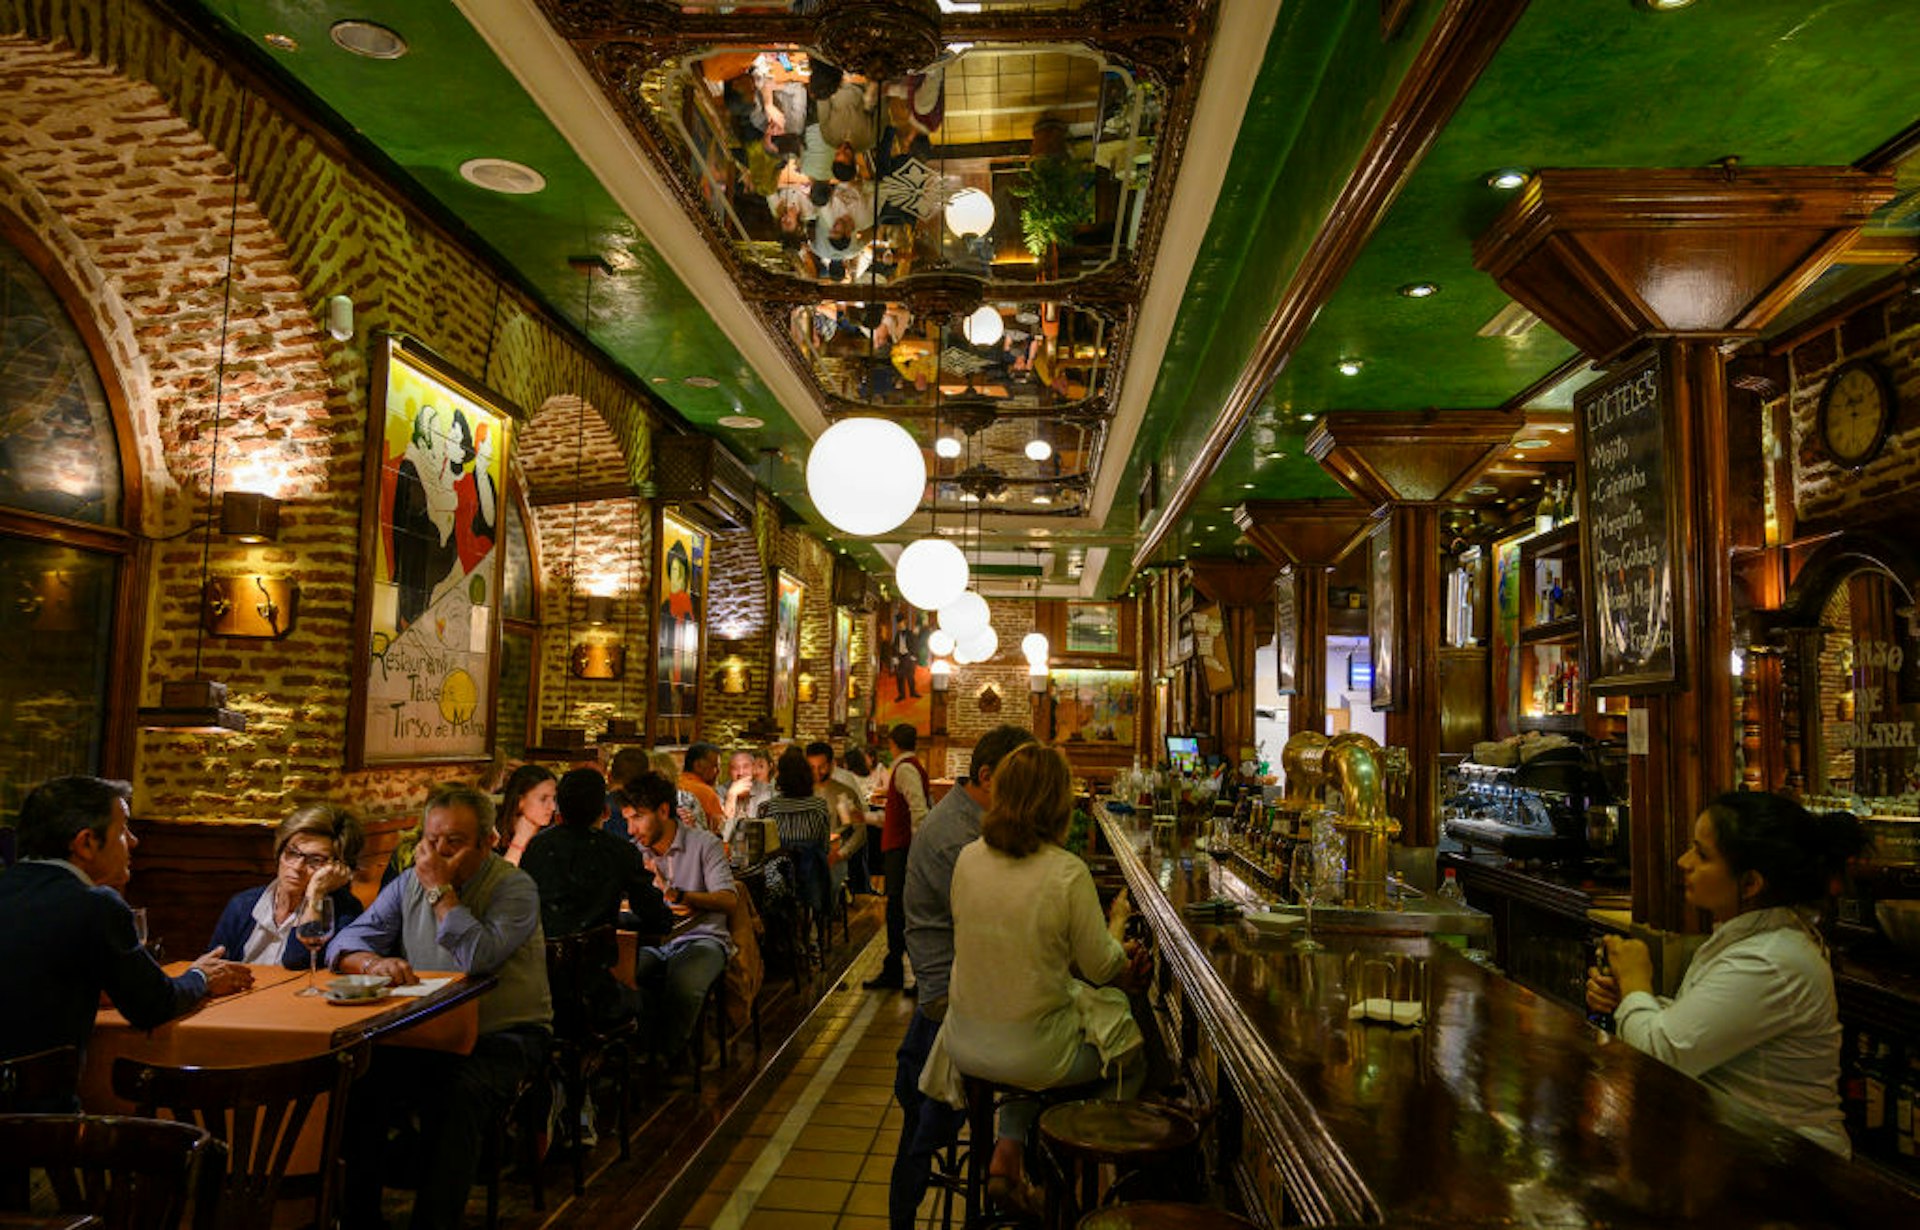 Patrons at dinner time in Tirso de Molina restaurant in Madrid, Spain